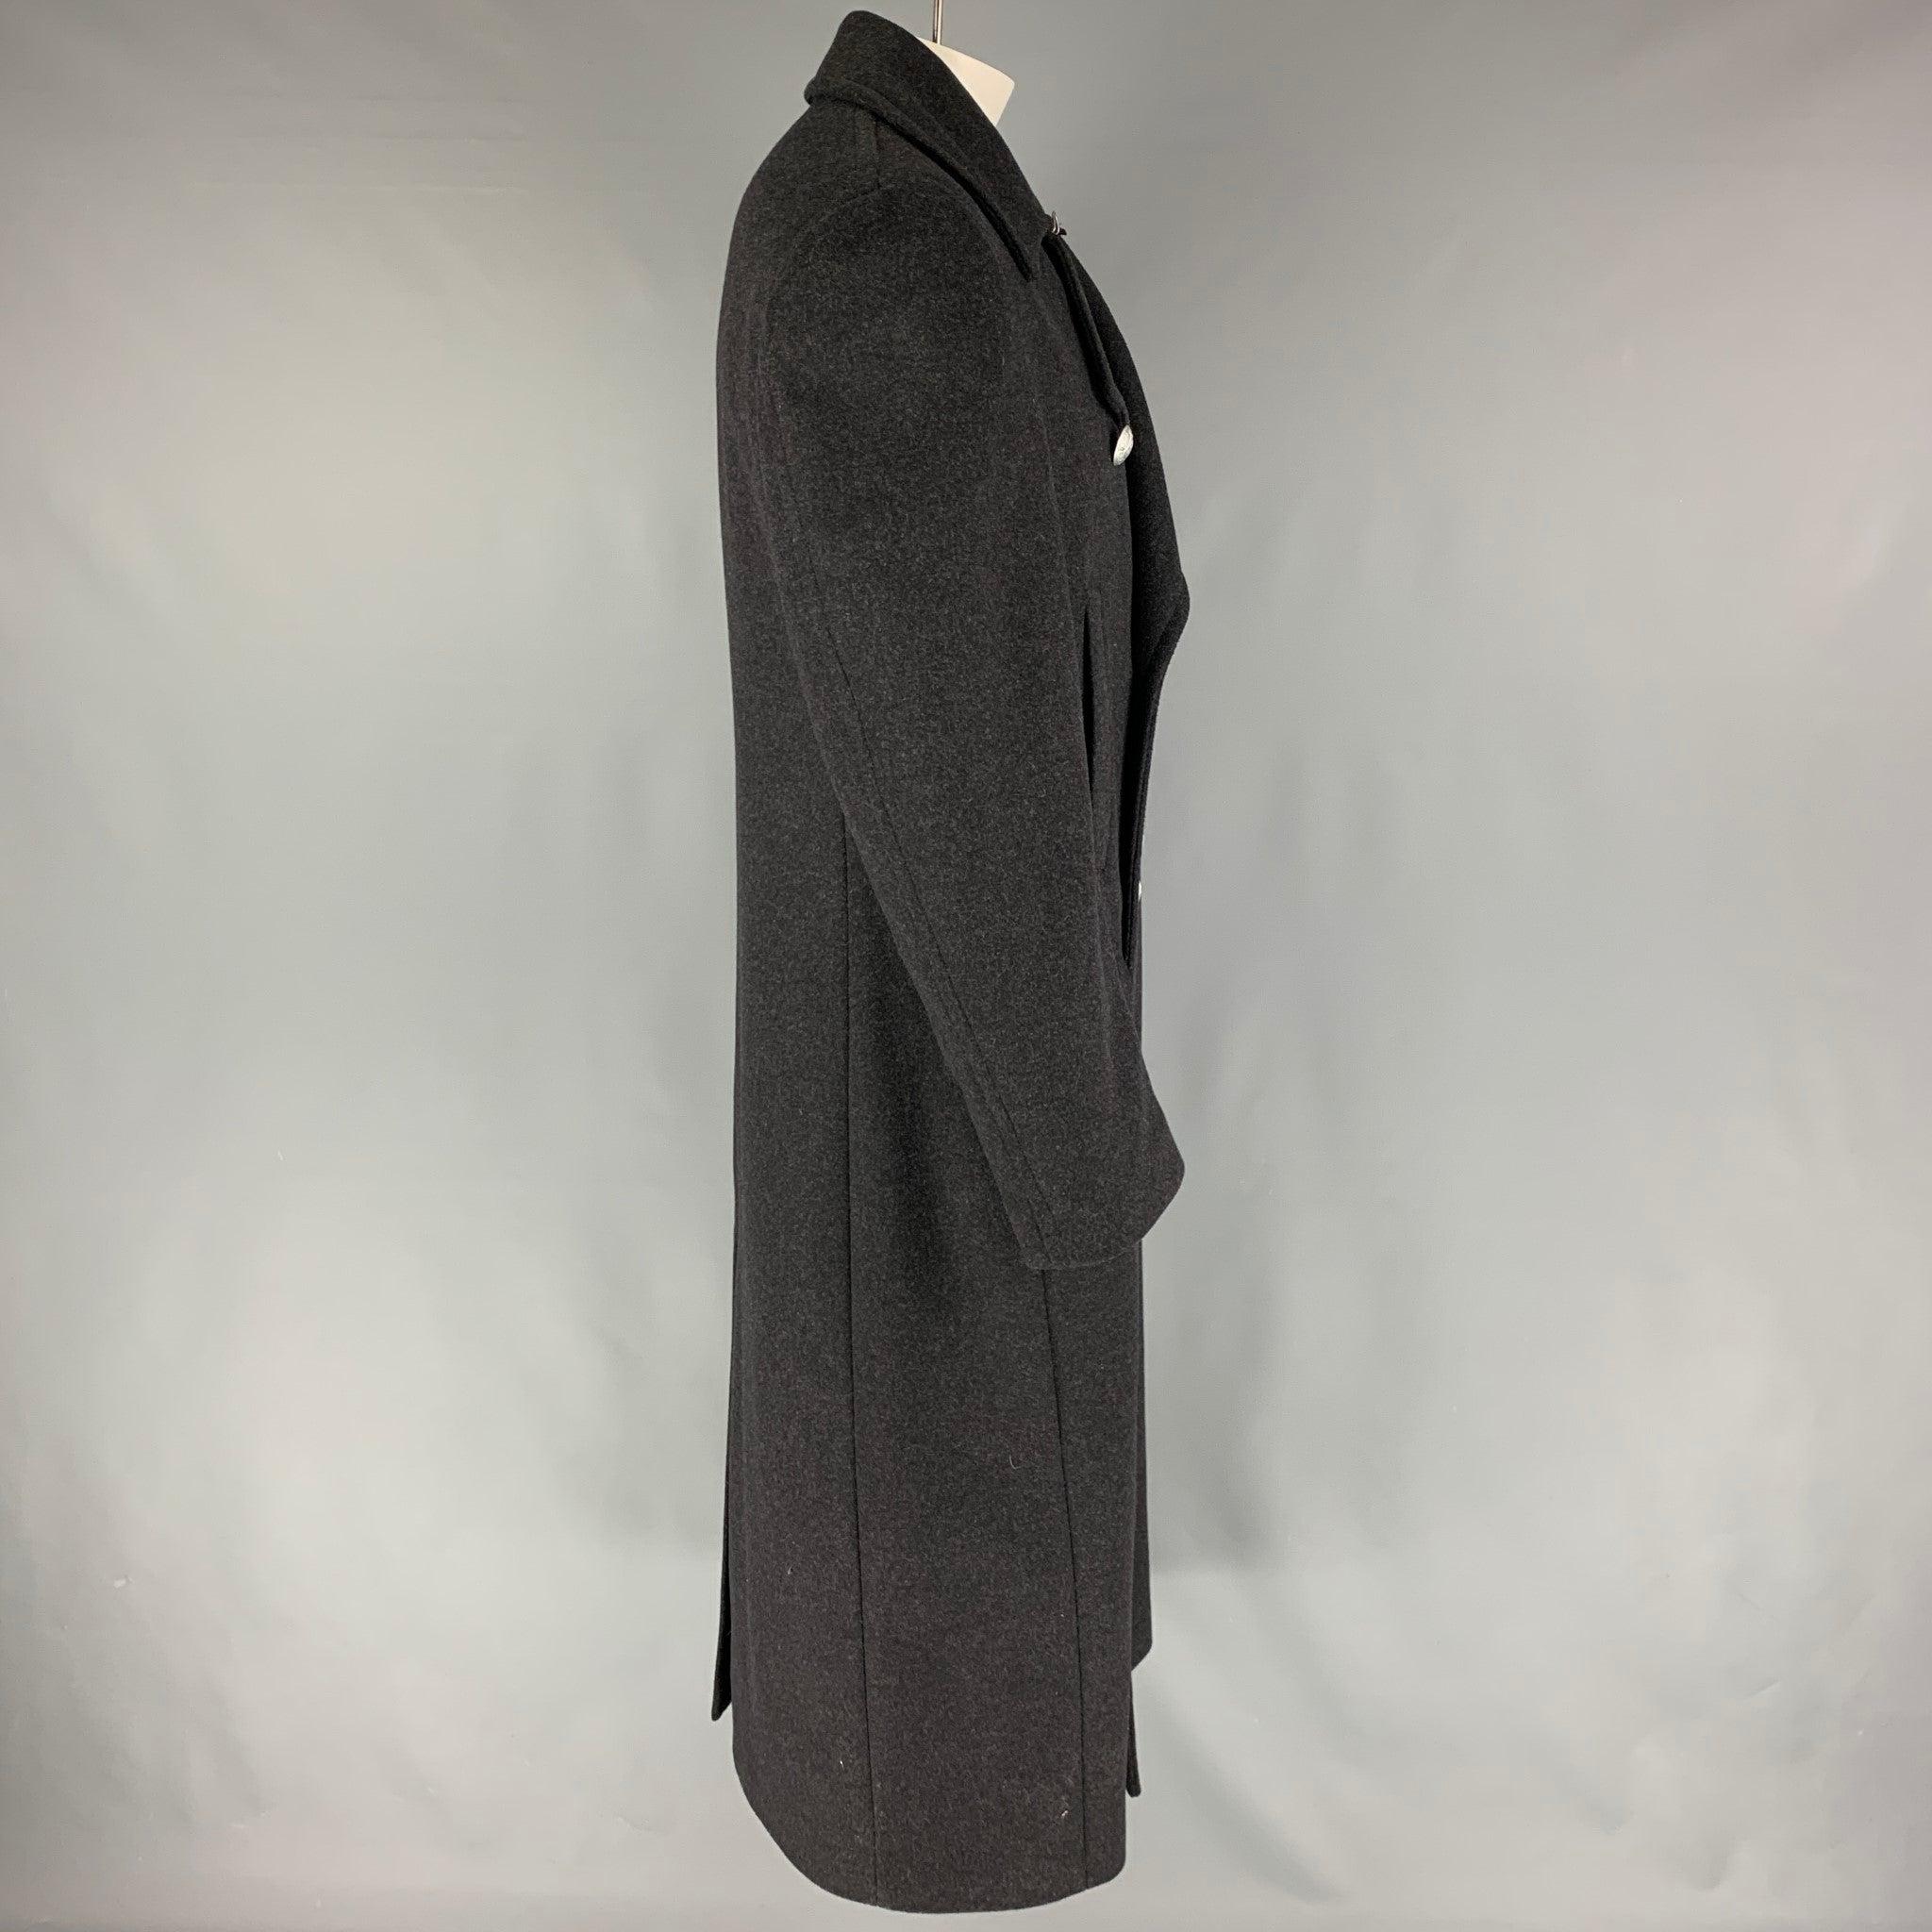 MICHAEL KORS coat comes in a charcoal wool blend featuring a notch lapel, flap pockets, silver tone buttons, single back vent, and a double breasted closure. Made in Italy.
Very Good
Pre-Owned Condition. 

Marked:   38R  

Measurements: 
 
Shoulder: